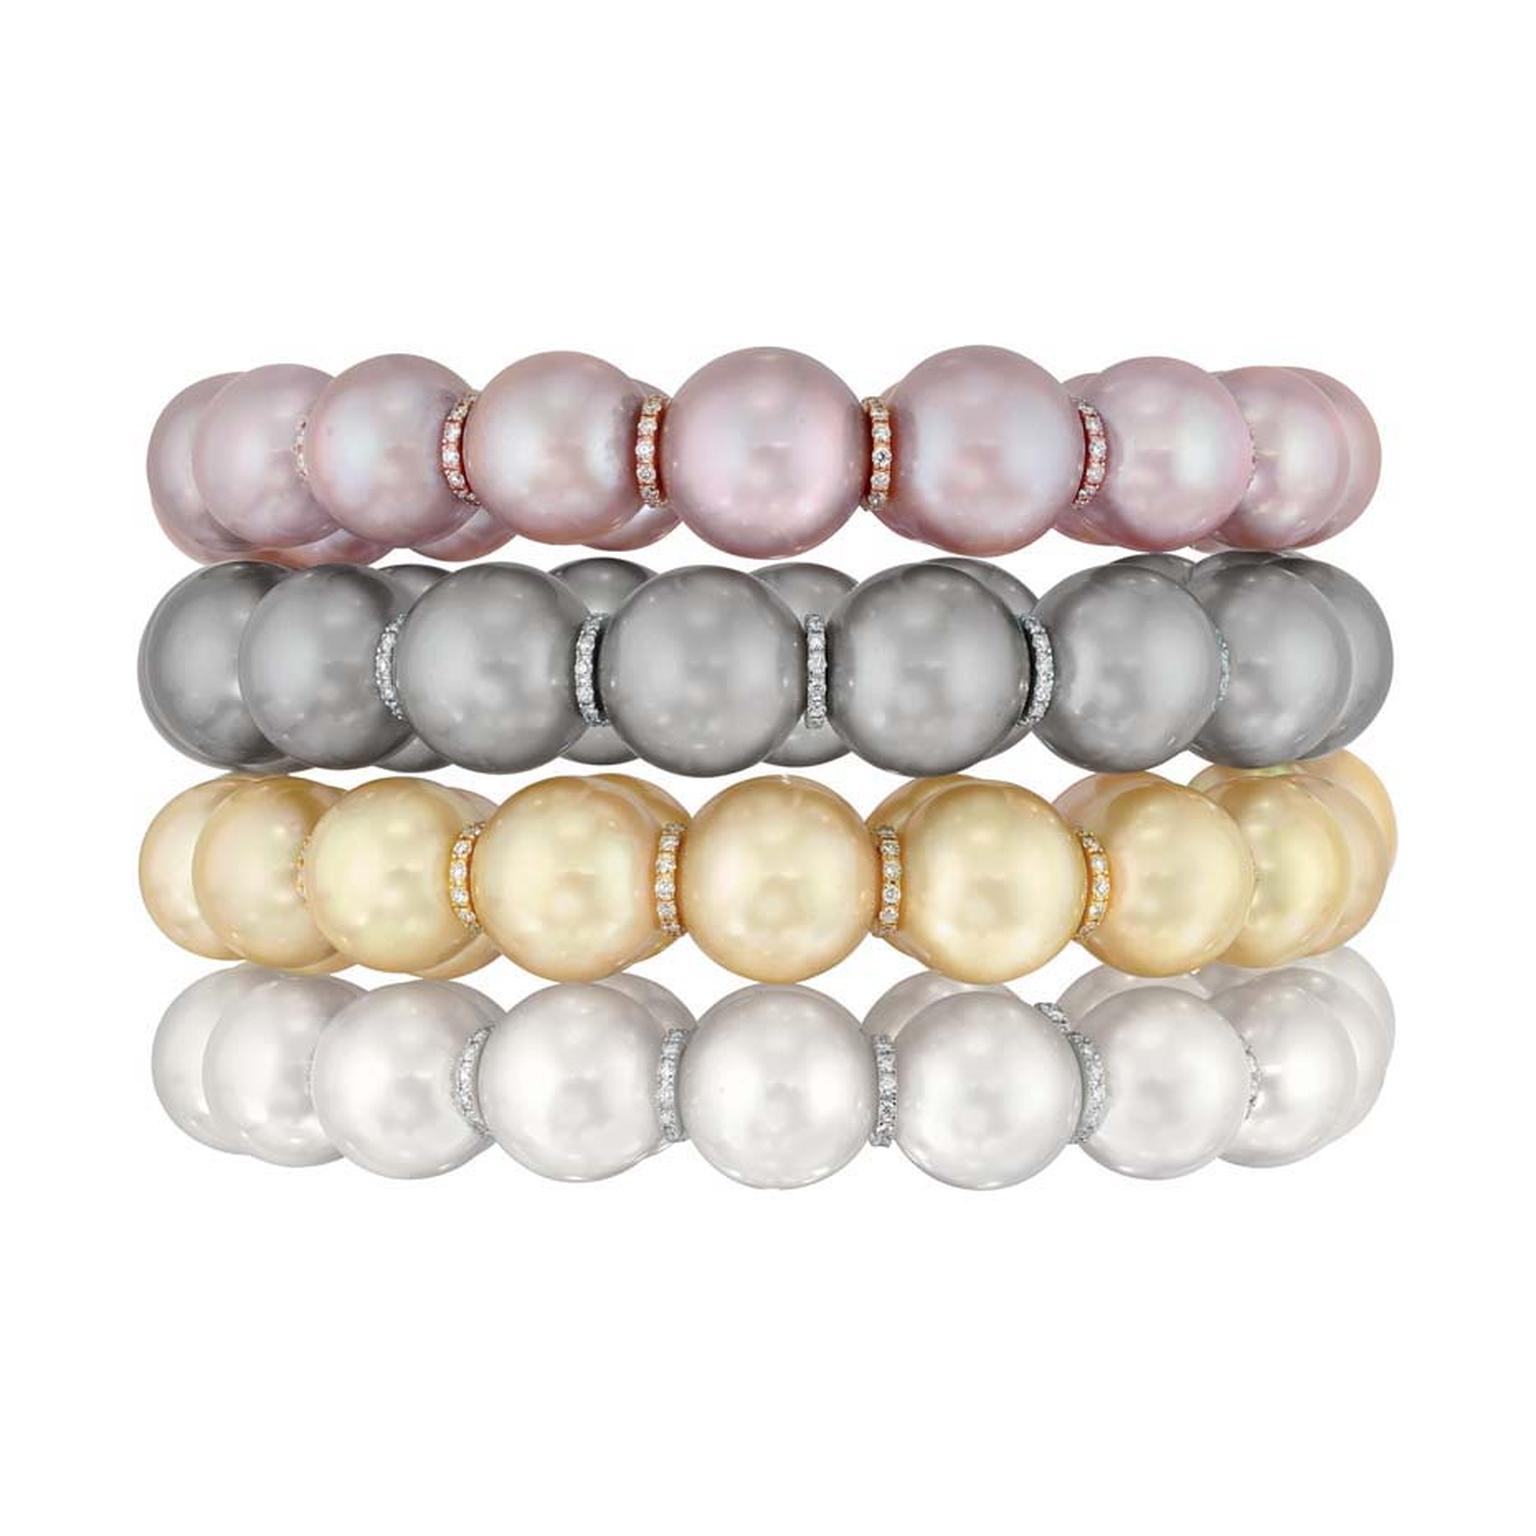 Chanel Perles Swing bracelet from the Les Perles de Chanel collection, set with brilliant-cut diamonds, 32 South Sea cultured pearls, 15 Tahitian cultured pearls and 17 freshwater cultured pearls.